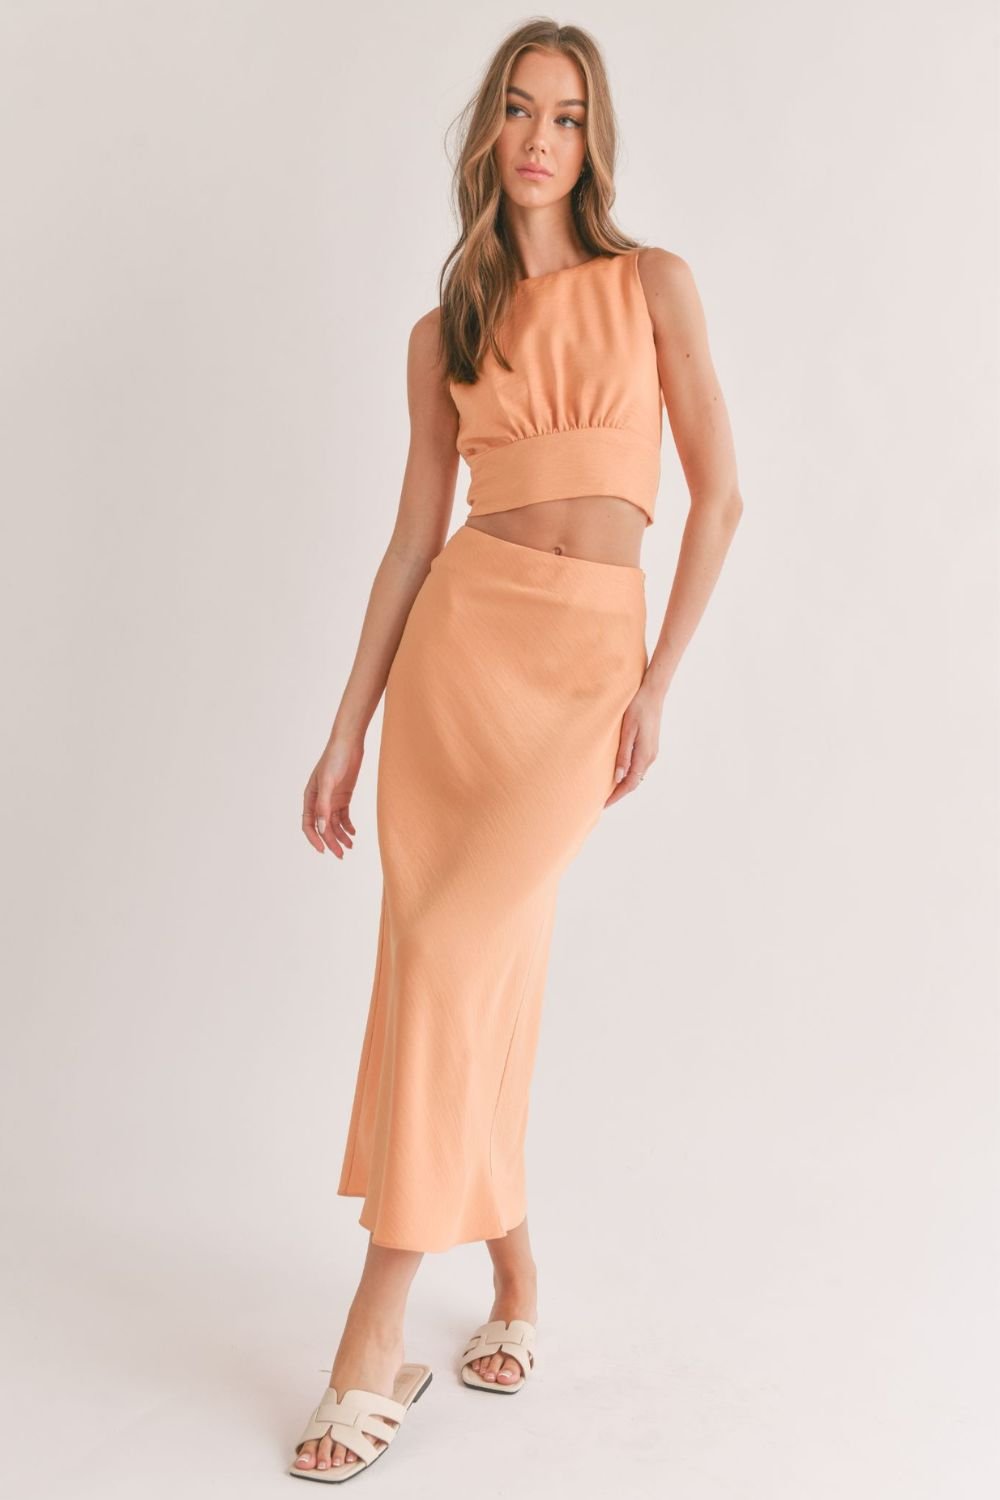 Women&#39;s Creamsicle Open Back Tie Top | Apricot - Women&#39;s Shirts &amp; Tops - Blooming Daily